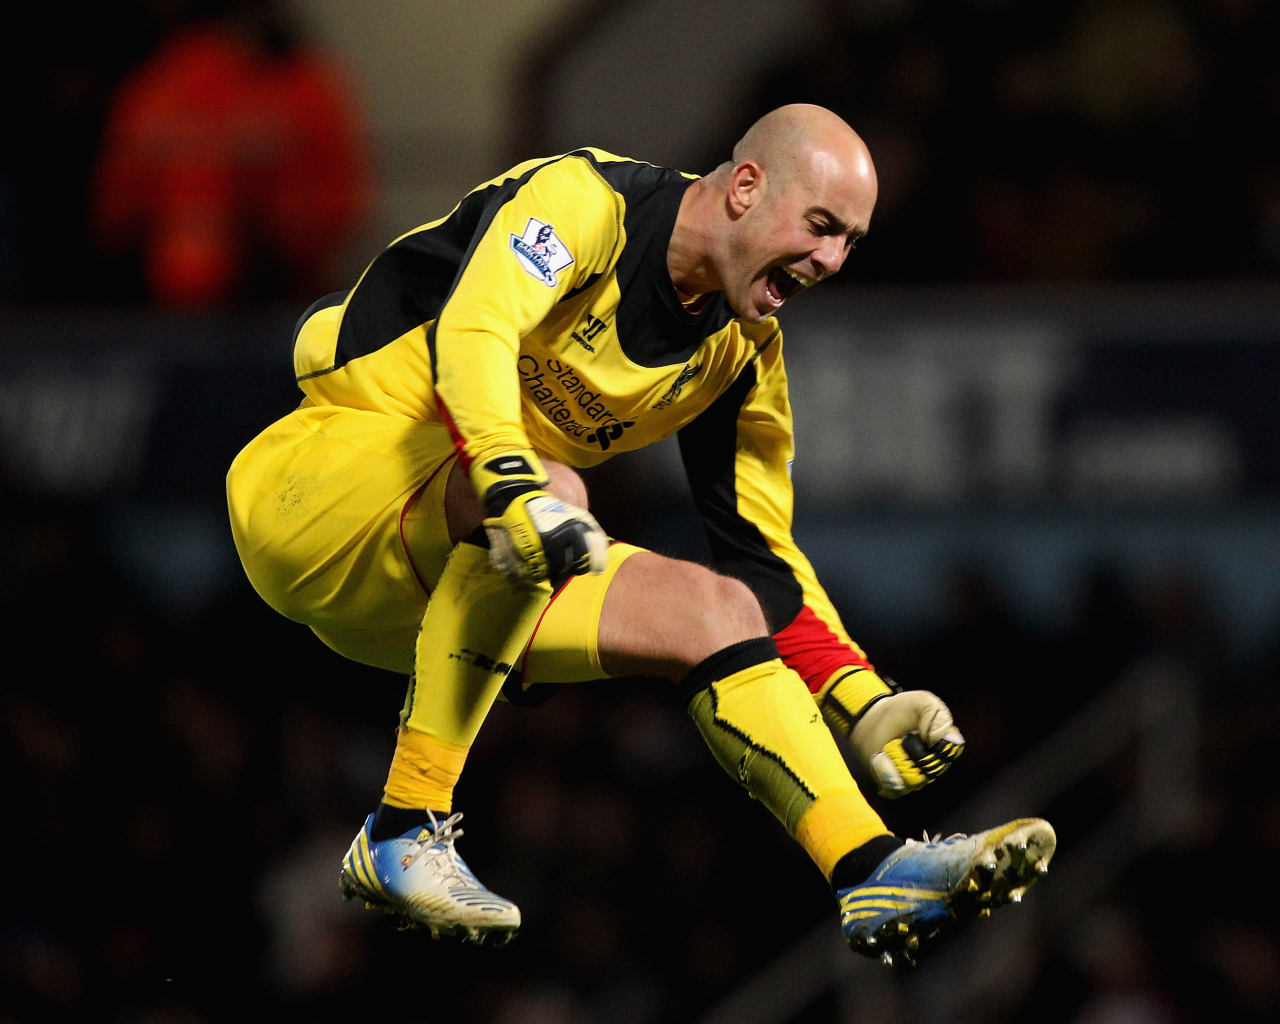 The player of Napoli Pepe Reina in the air